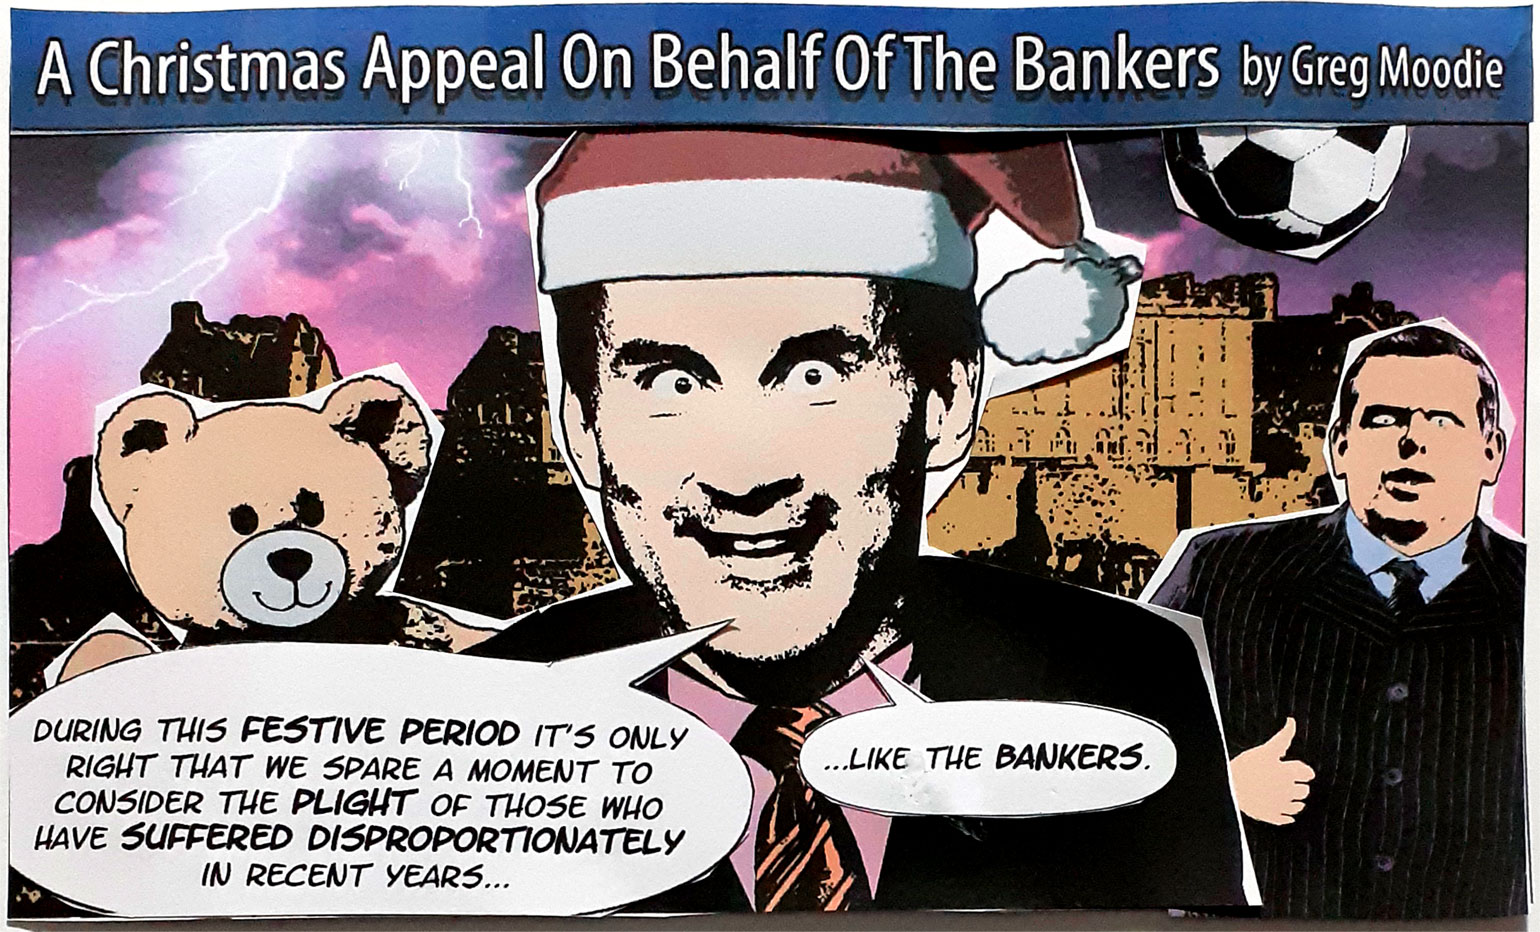 A Christmas Appeal On Behalf Of The Bankers